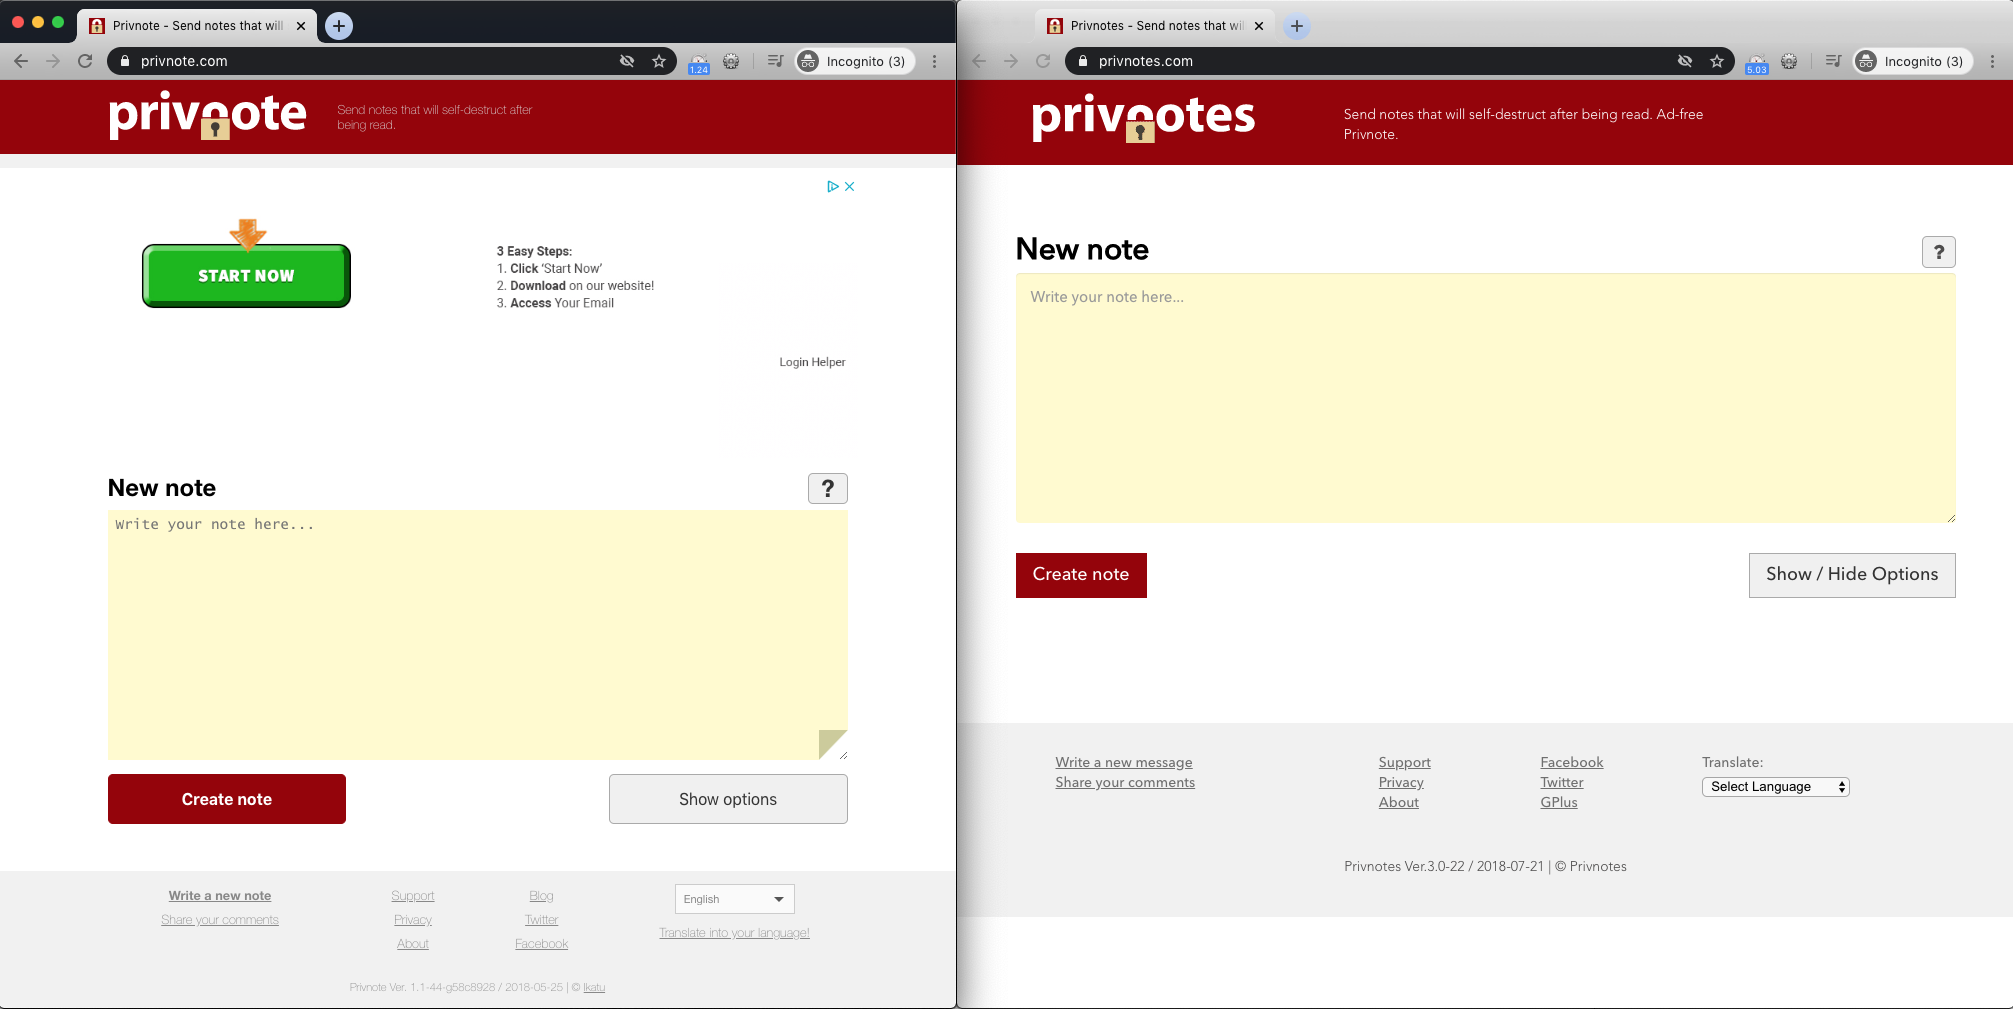 Suggestions to make use of the privnote.com